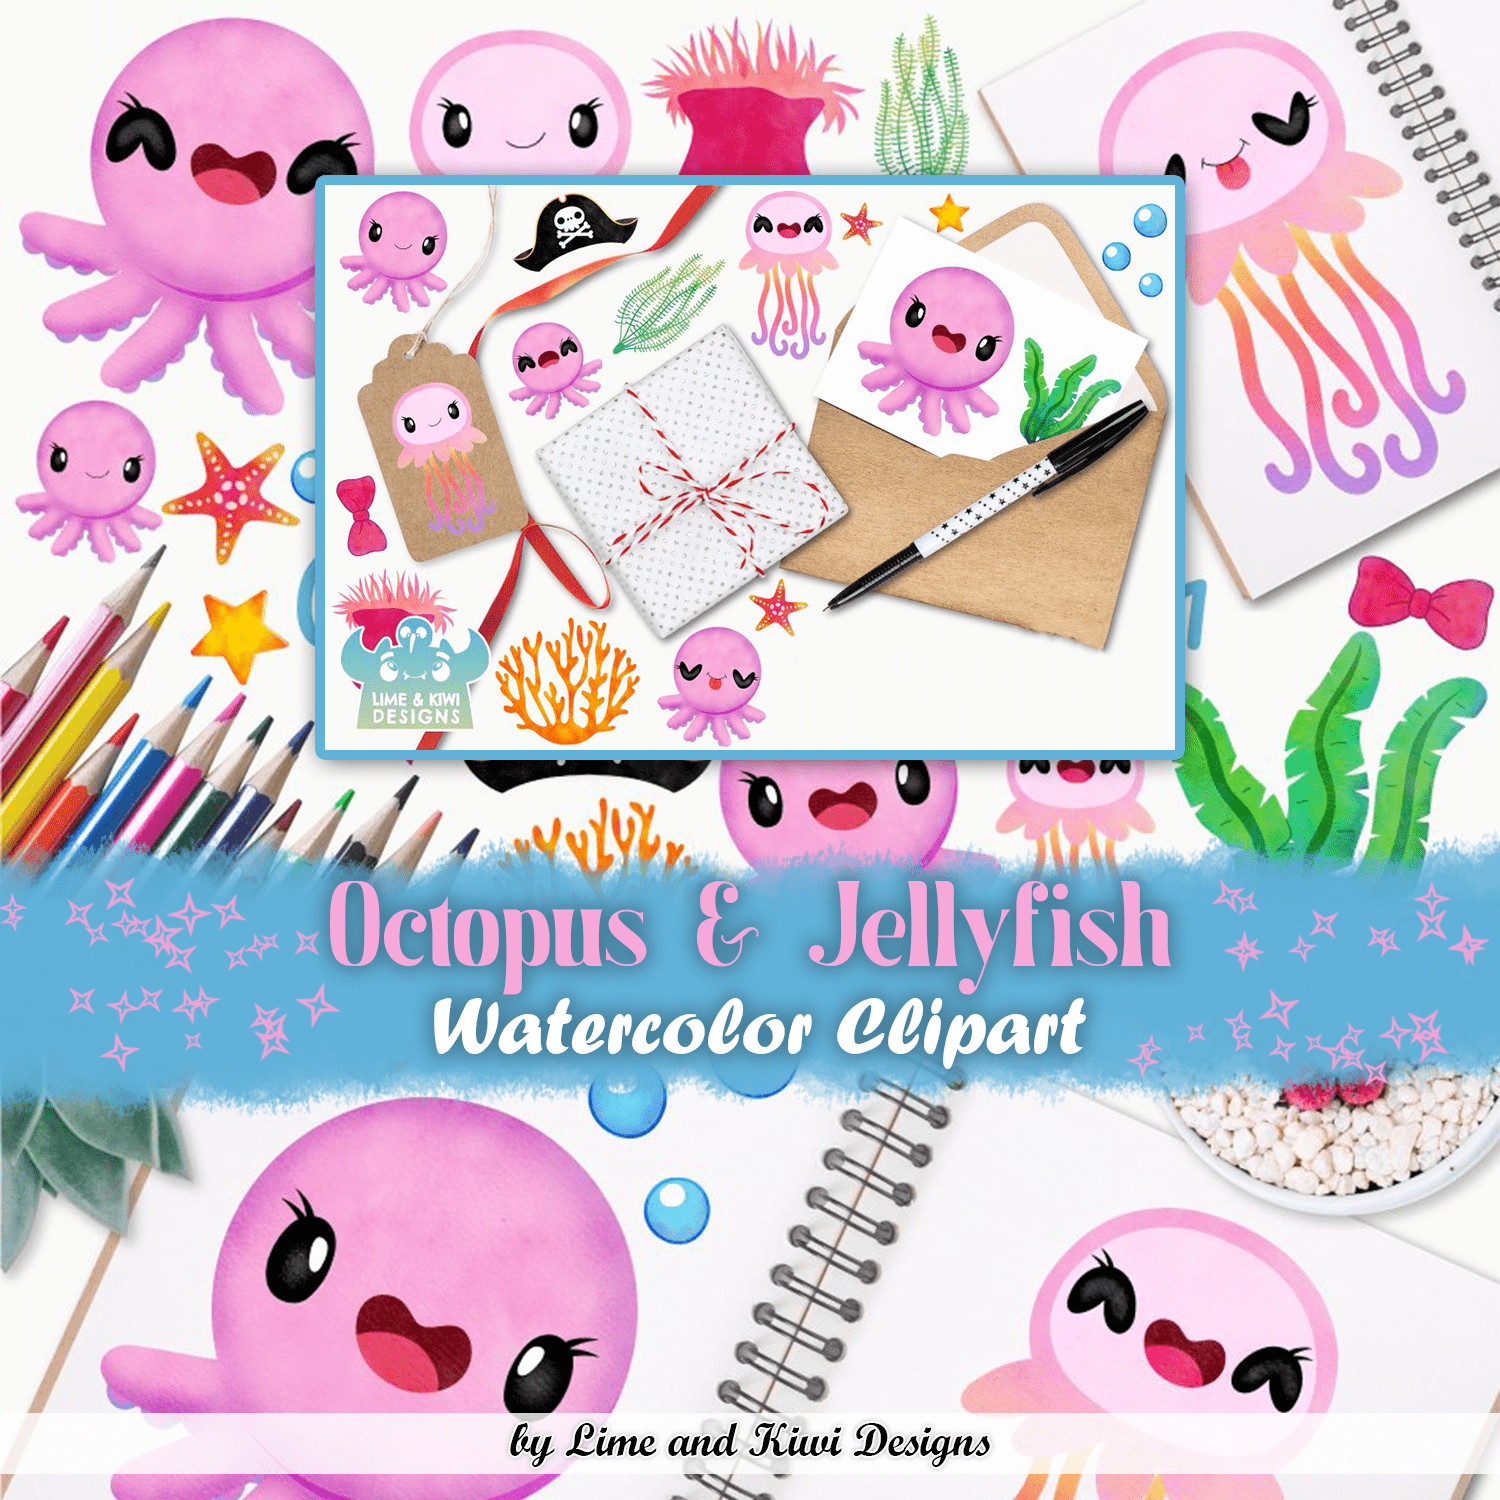 Octopus & Jellyfish 1 Watercolor Clipart, Instant Download.